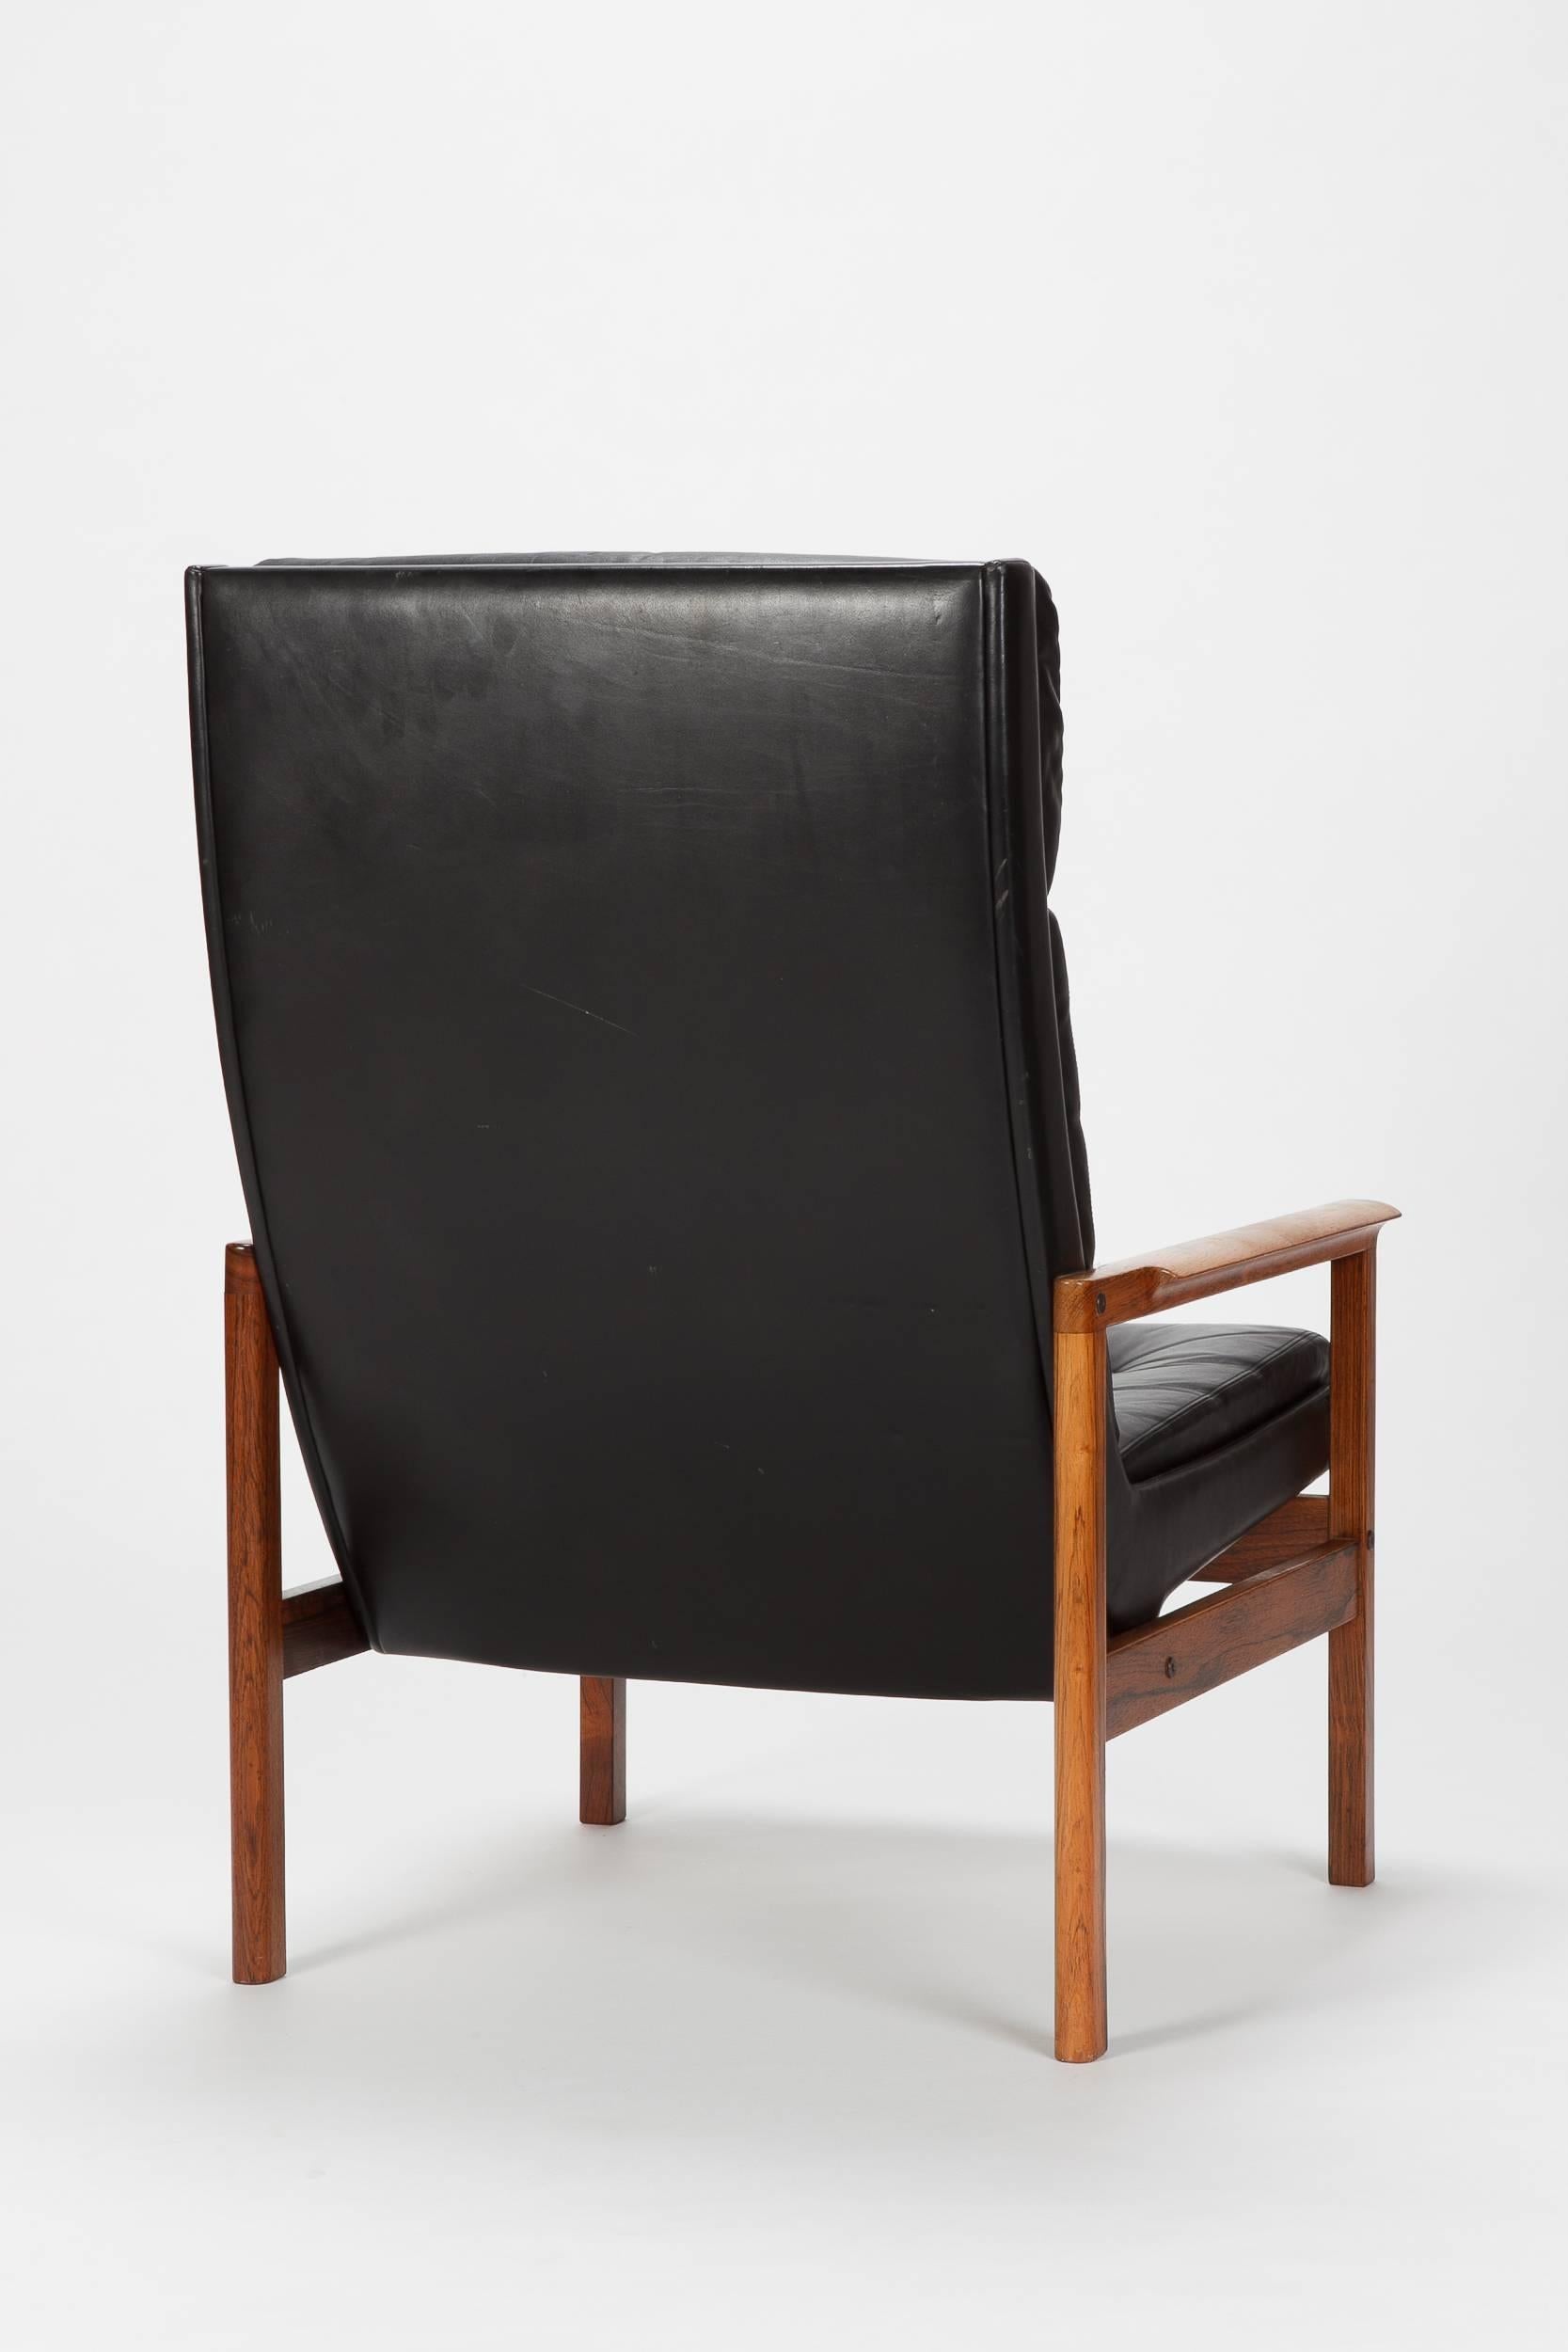 Norwegian Rosewood High Back Lounge Chair Attributed to Frederick Kayser, 1960s